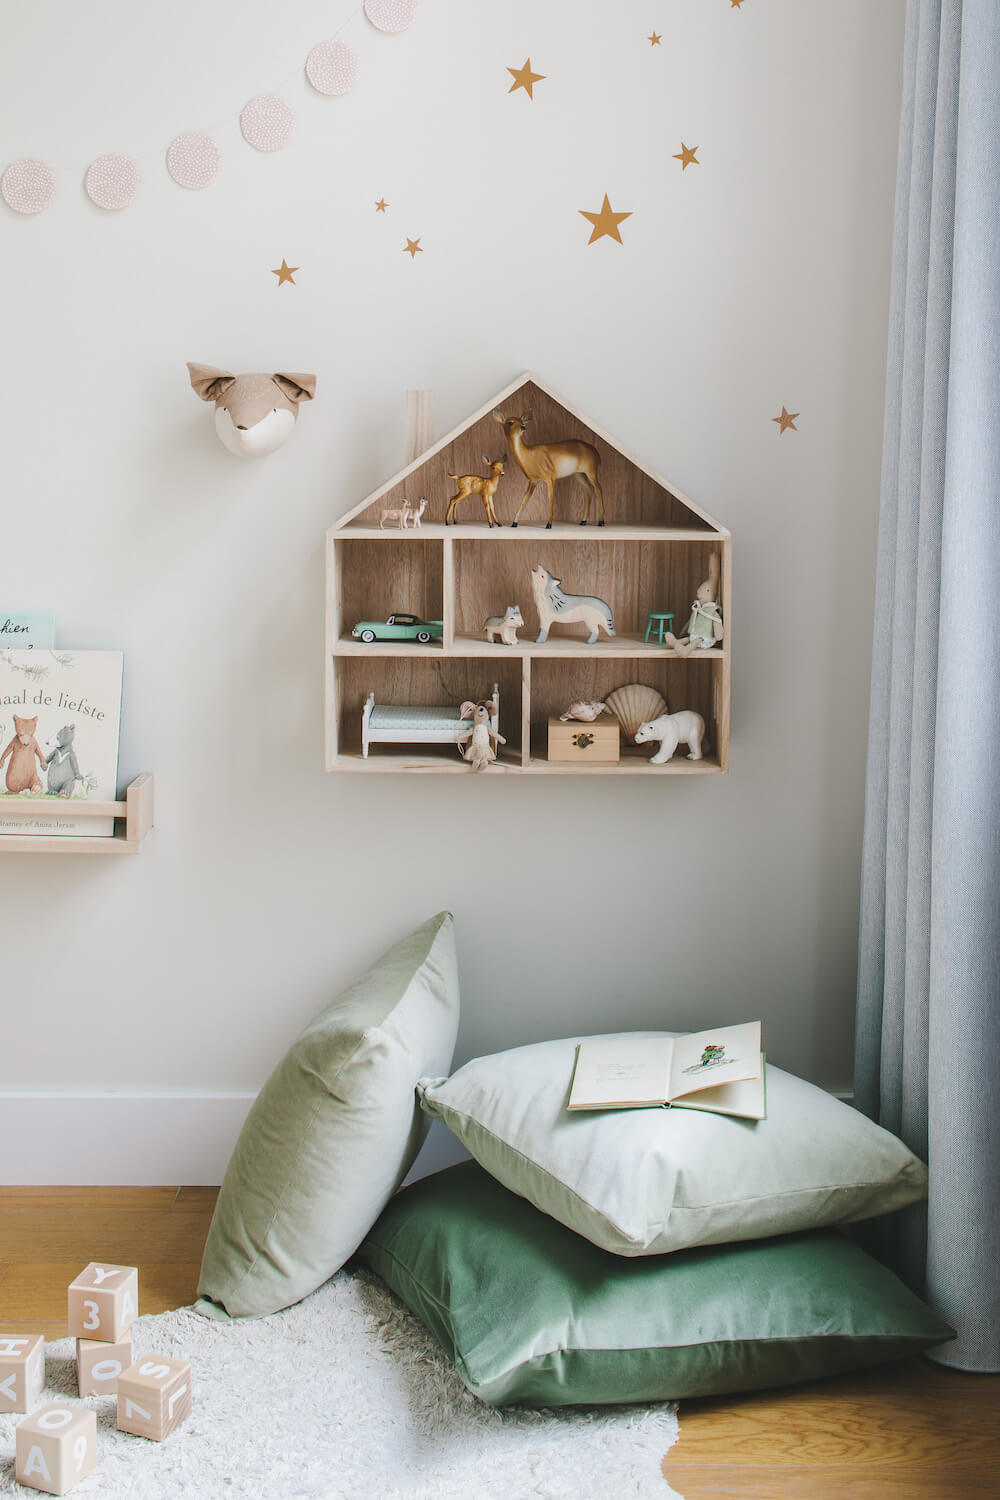 Tips for designing small children’s rooms